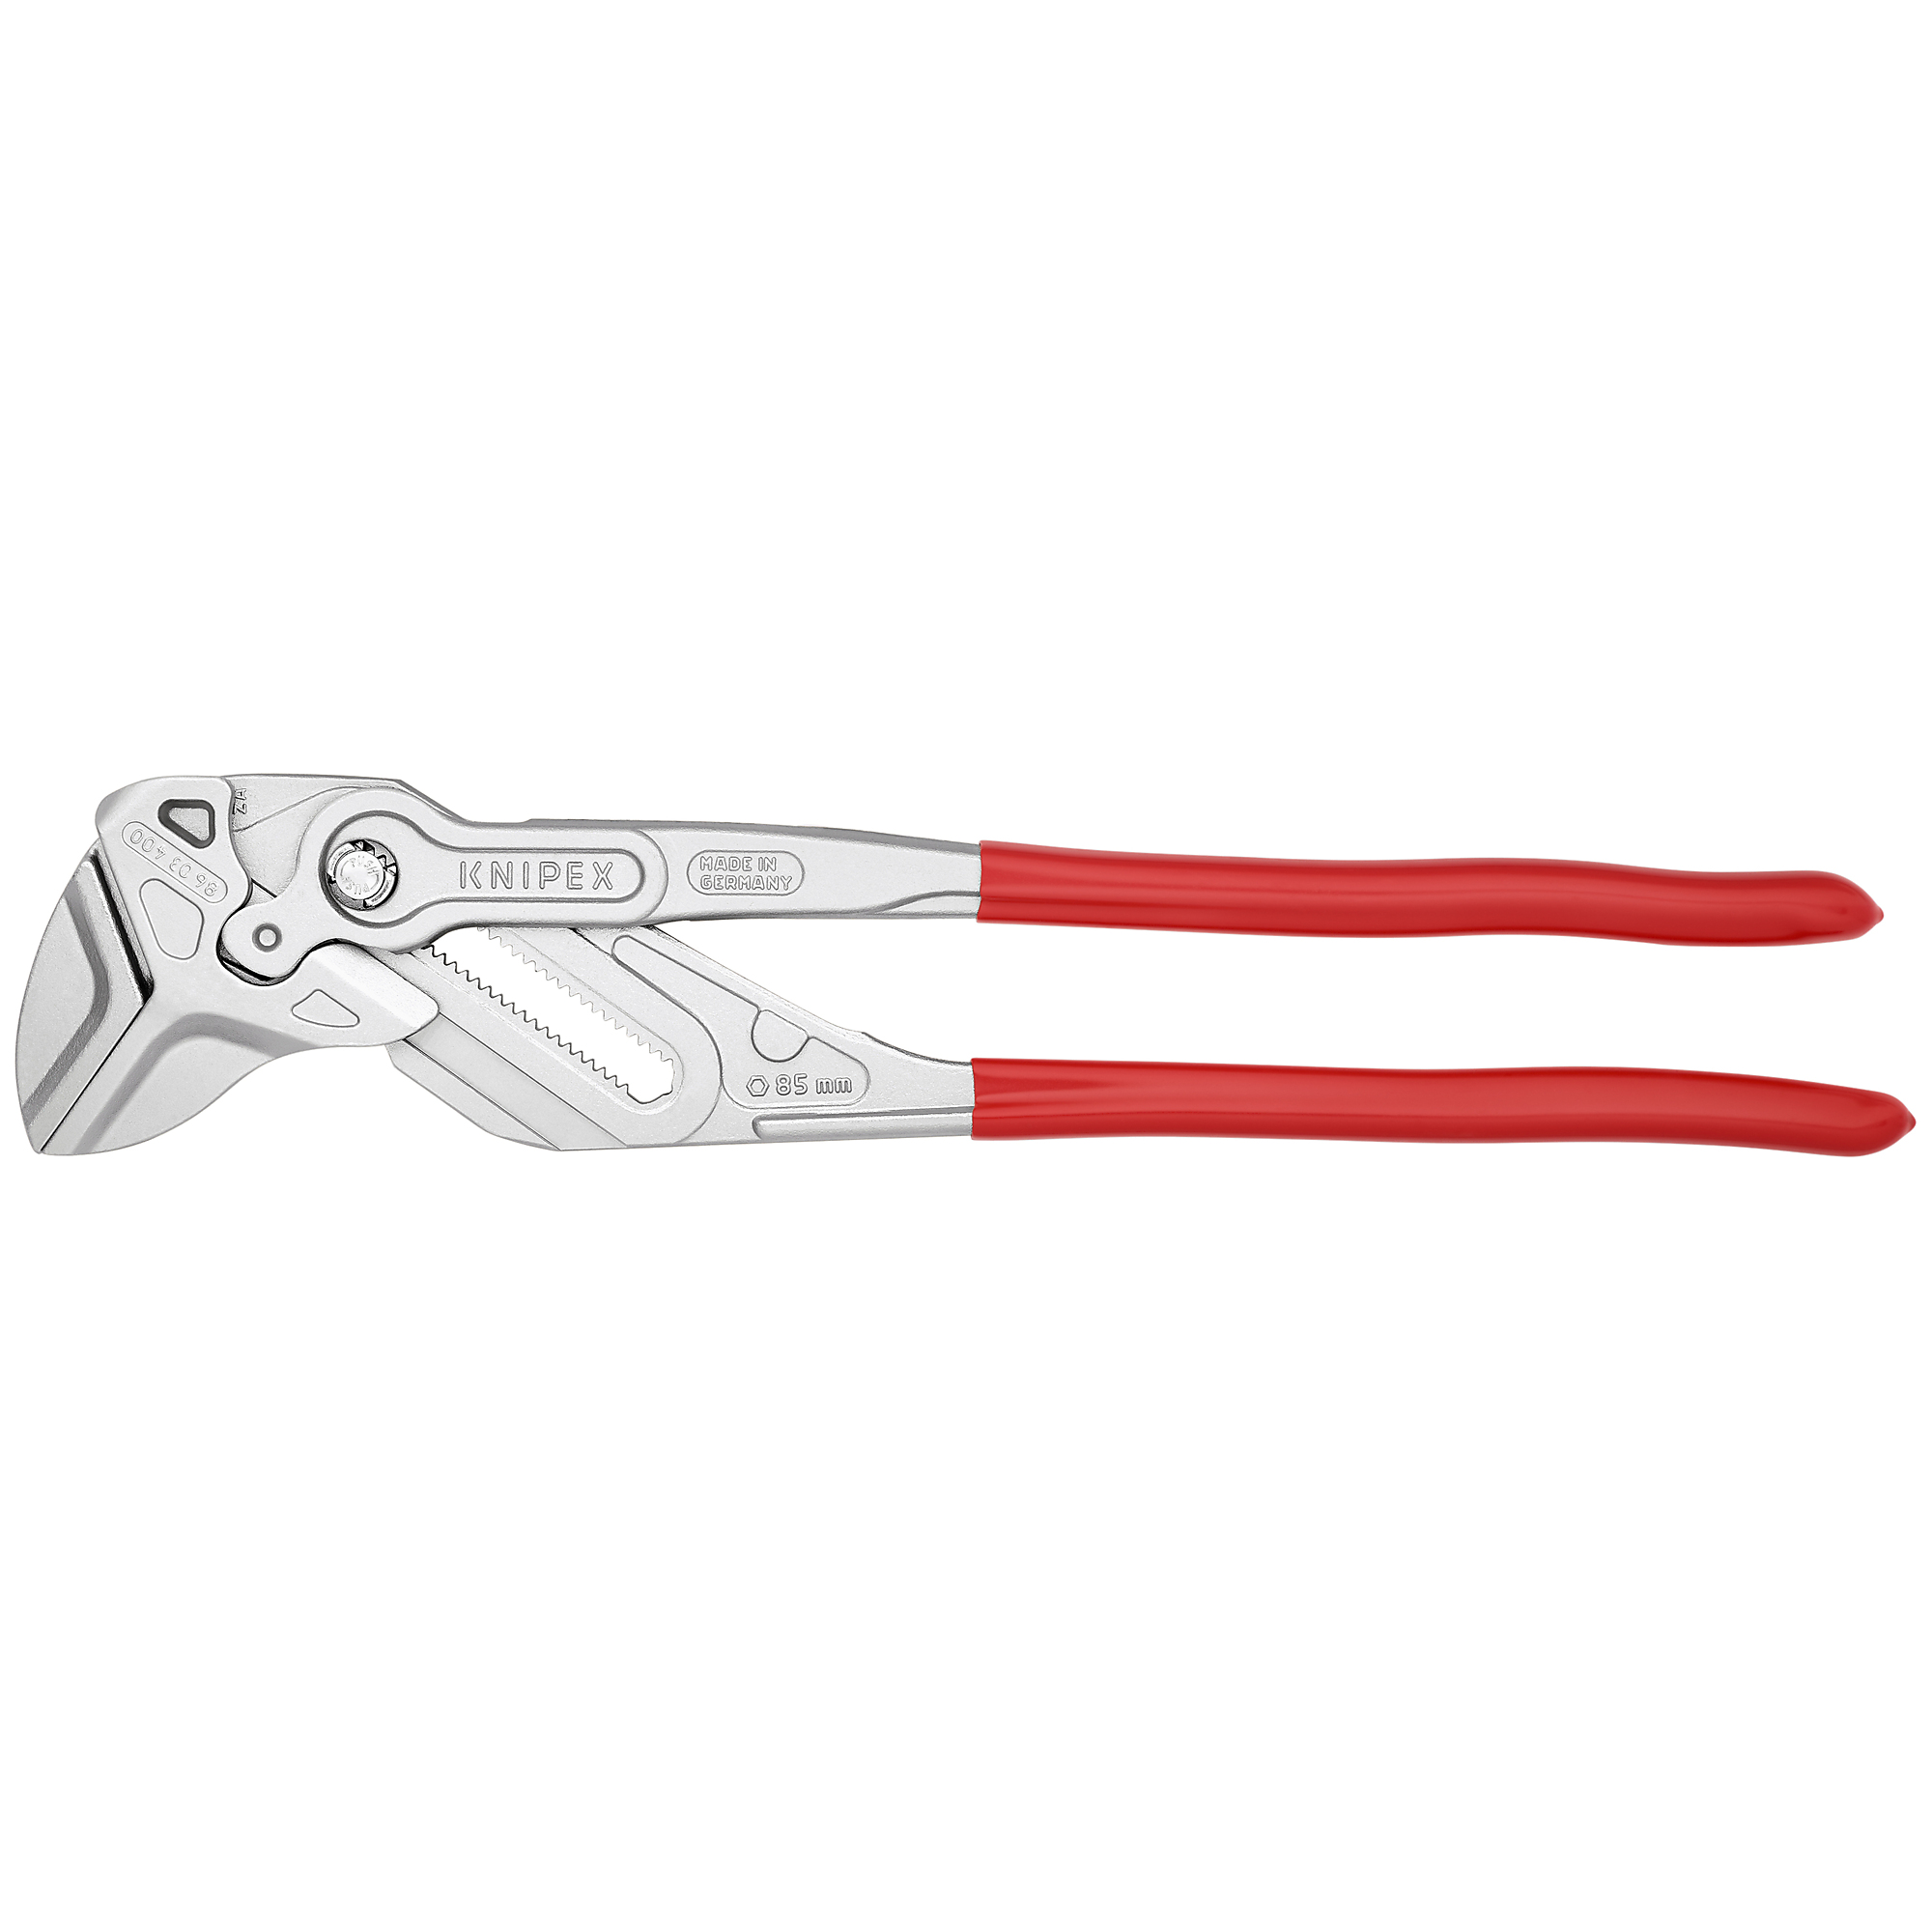 KNIPEX, XL Pliers Wrench, Plastic coating, Bulk, 16Inch, Pieces (qty.) 1 Material Steel, Jaw Capacity 3.375 in, Model 86 03 400 US